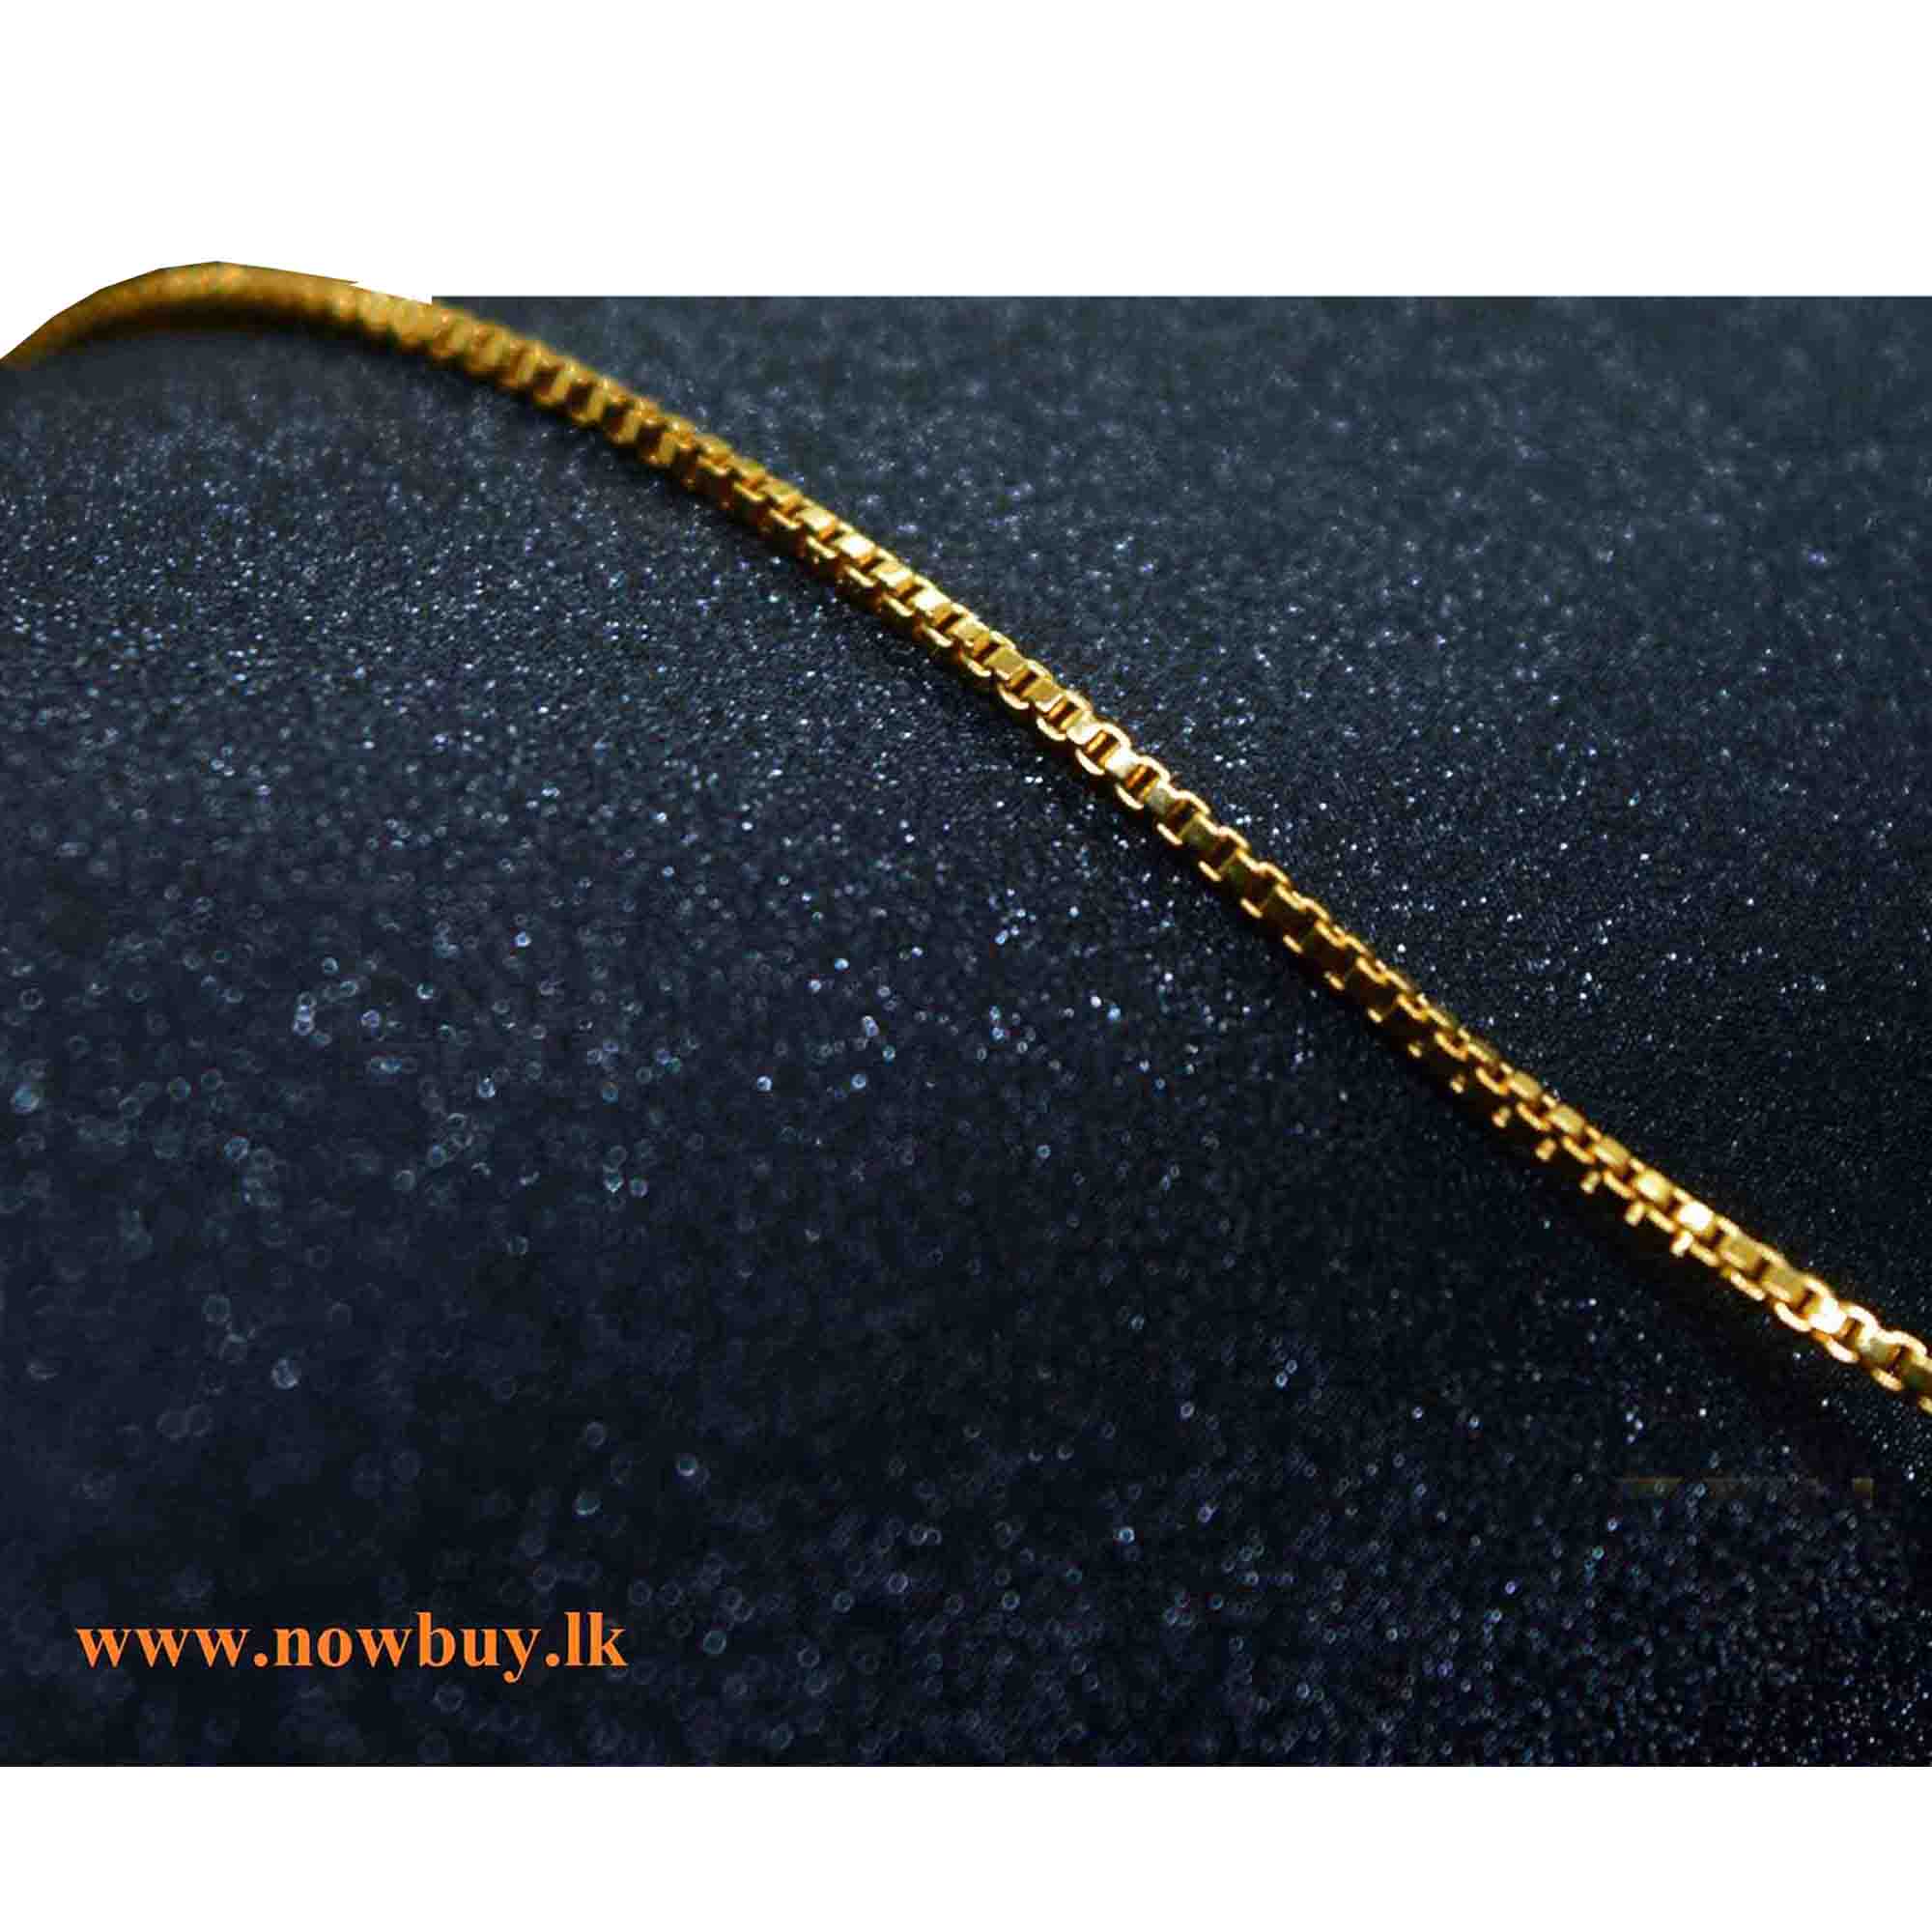 18/24 Inch Short Gold plated 01MM Small BK Box Chain With Small Anchor Pendant (NBLK) Necklaces NowBuy.lk 3